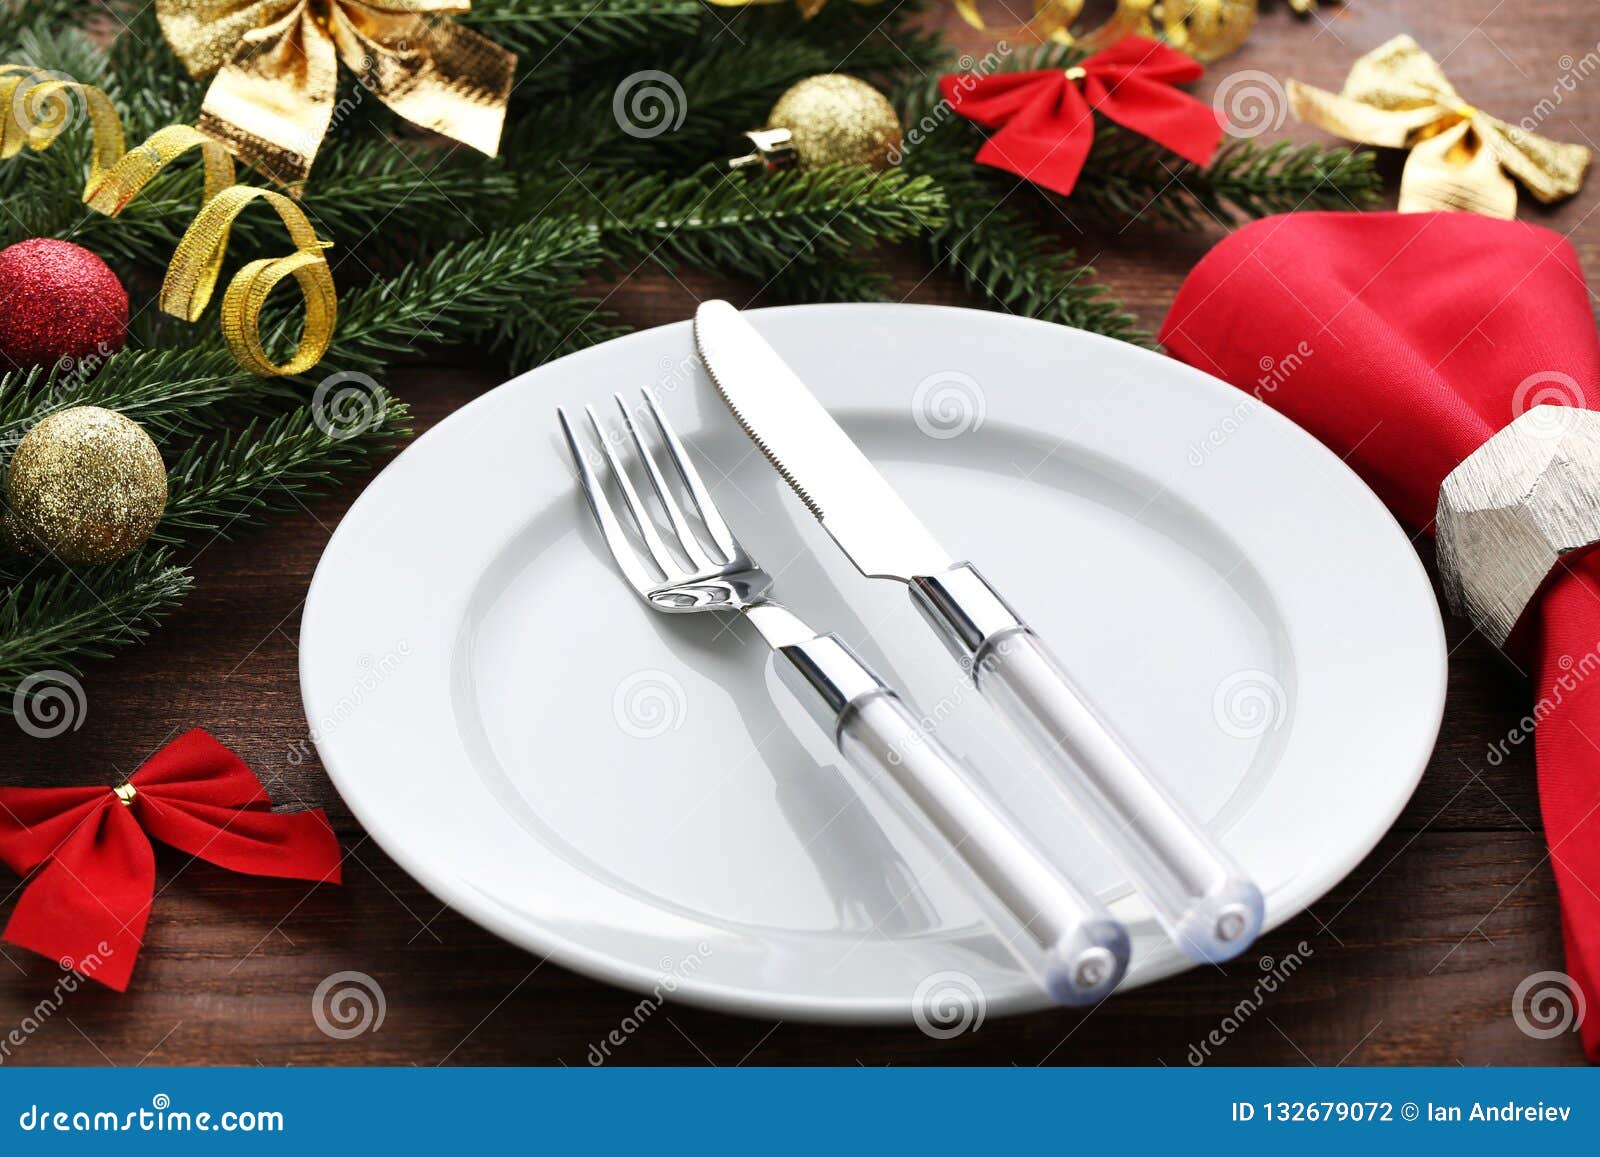 Kitchen Cutlery with Christmas Decorations Stock Photo - Image of ...